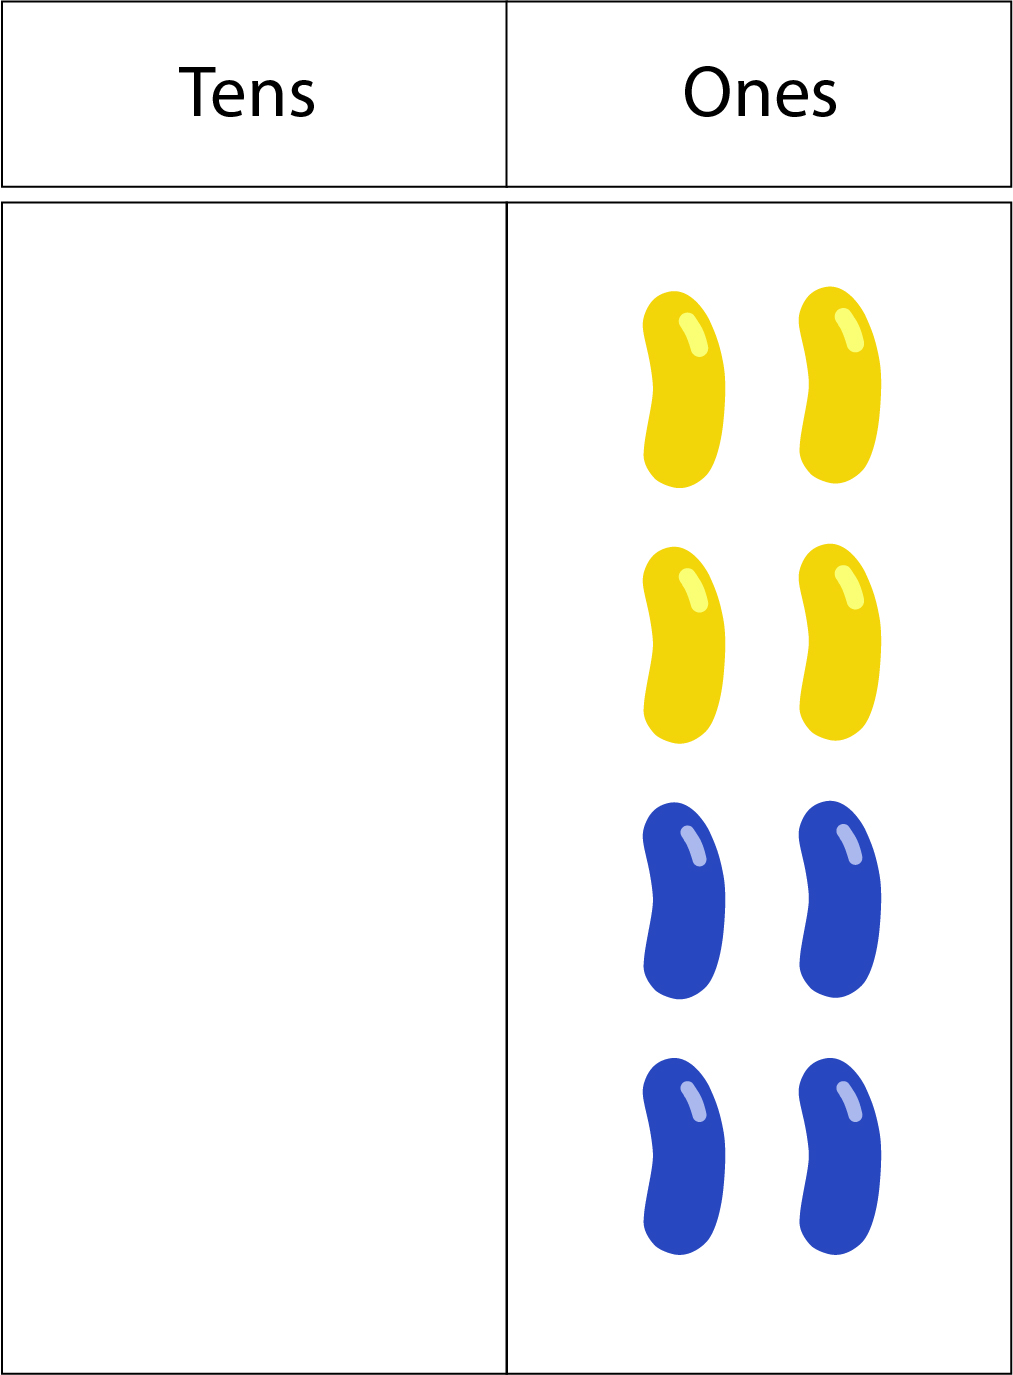 Image of a two-column place value board (tens and ones) displaying eight single beans in the ones column.